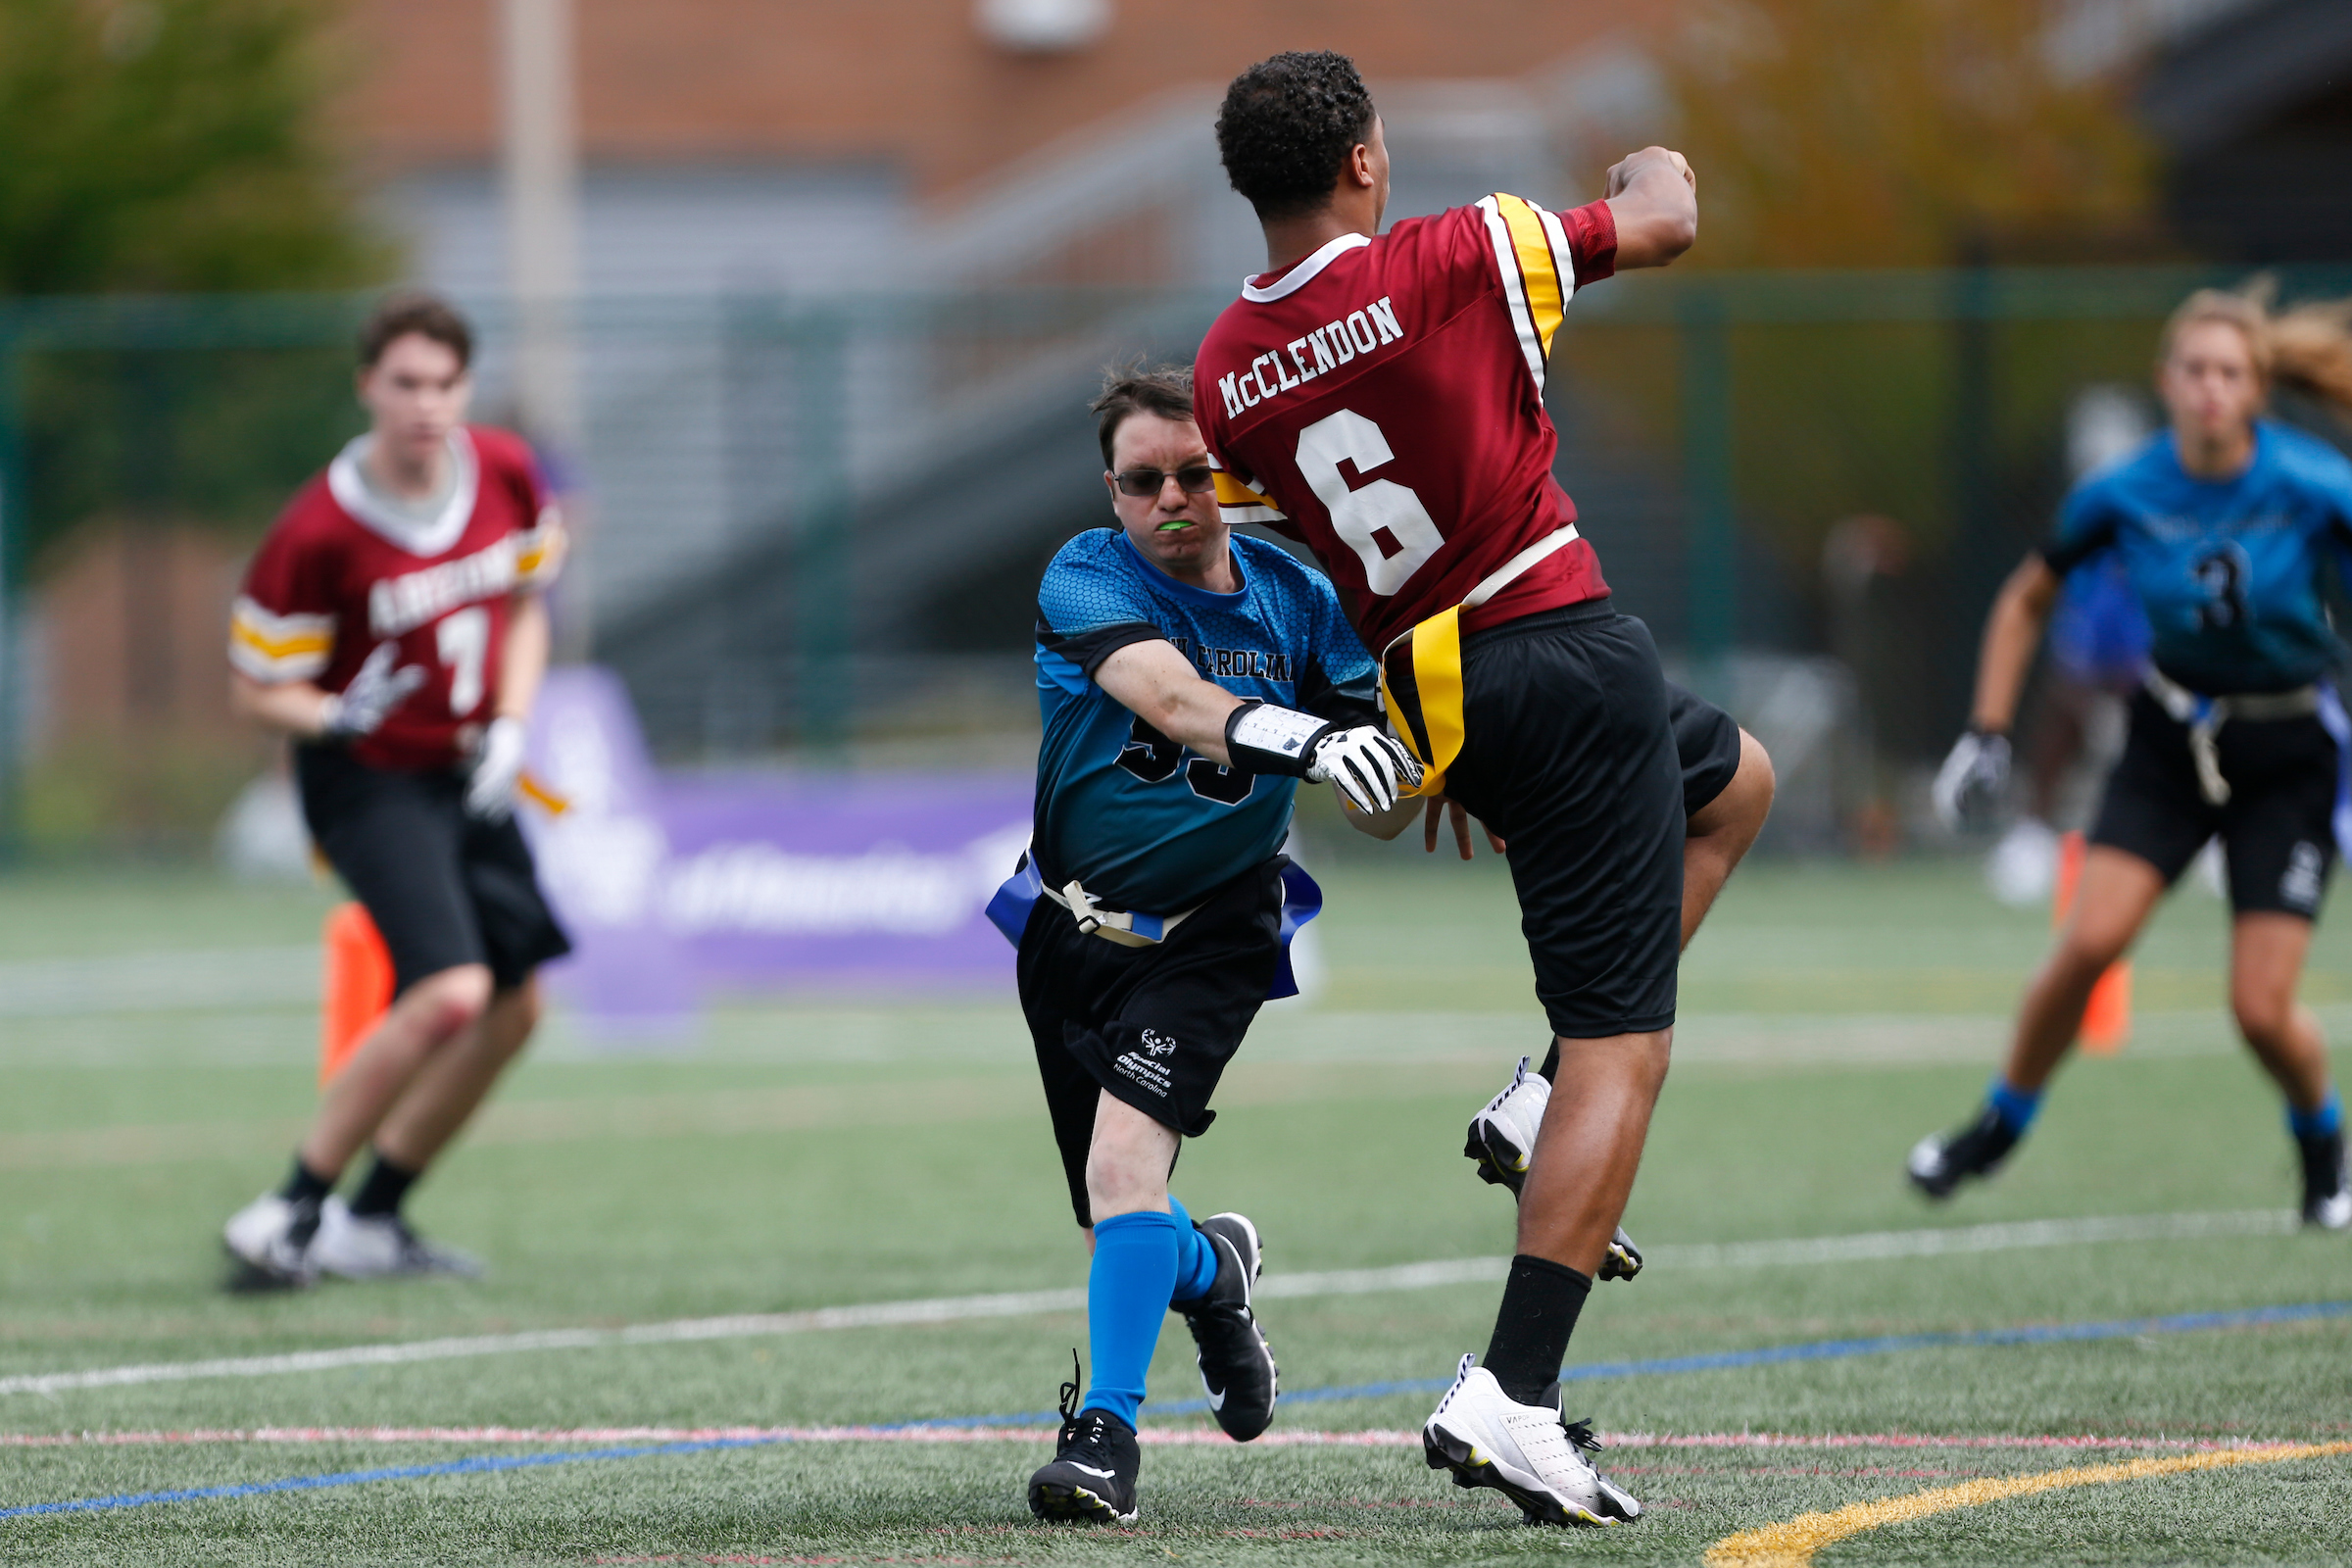 Ryan getting a tackle in Flag Football